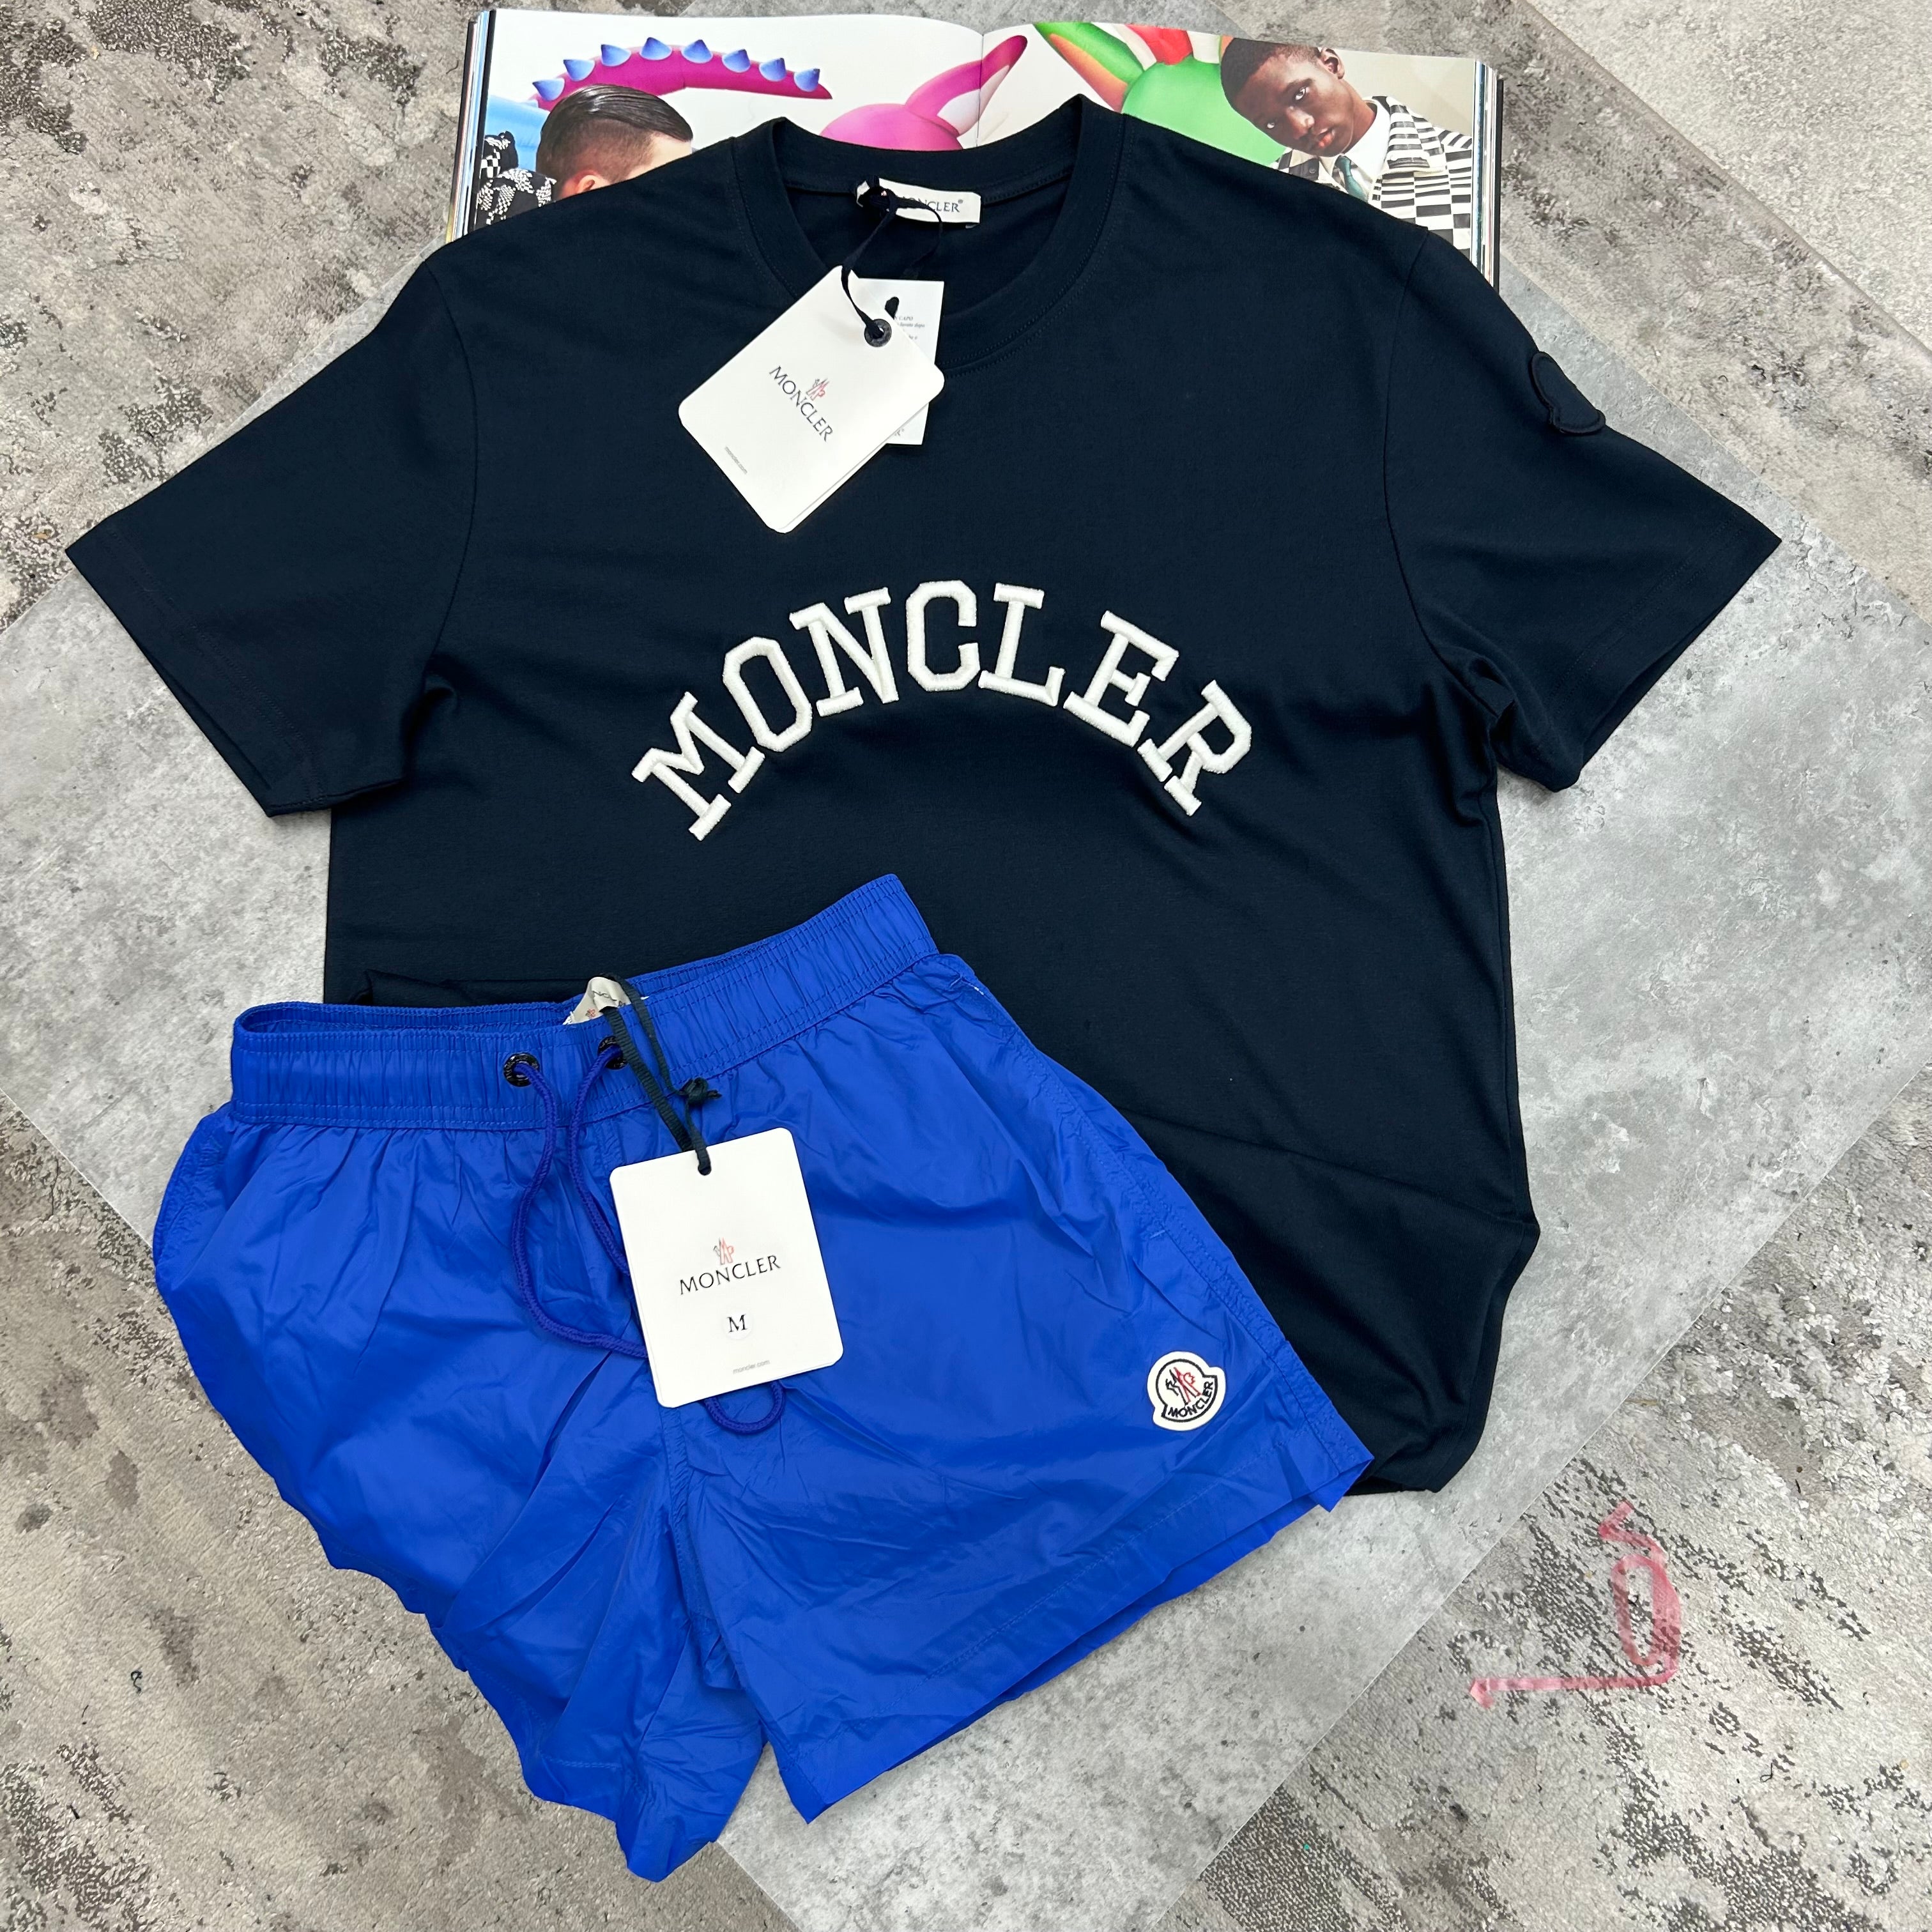 MONCLER - EMBROIDED LOGO T-SHIRT - NAVY